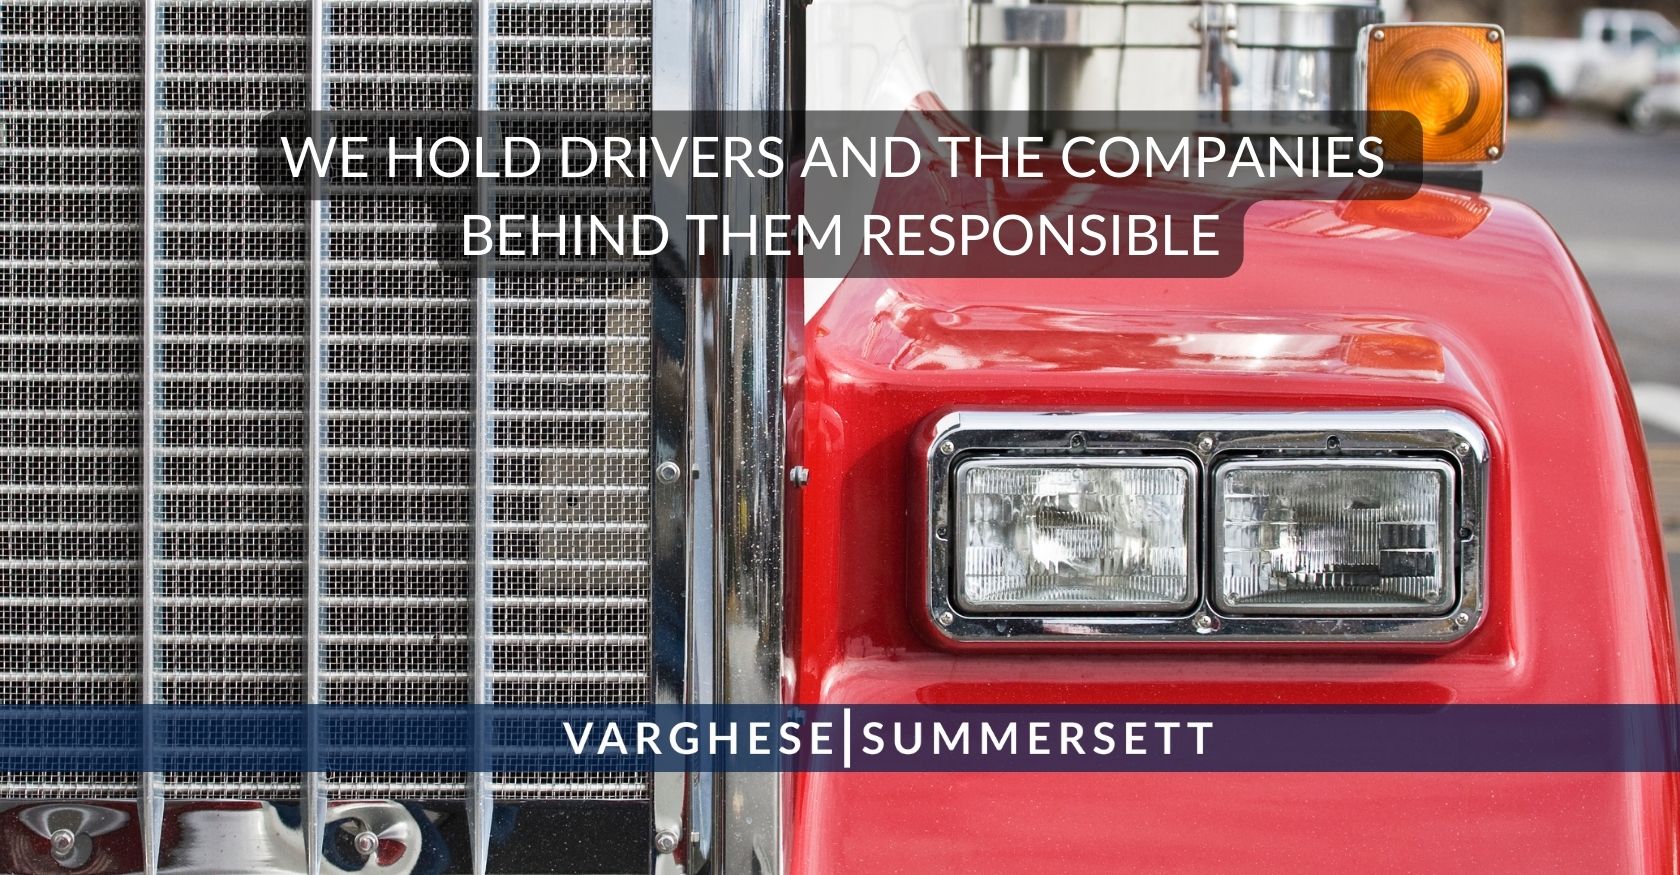 holding truck drivers responsible